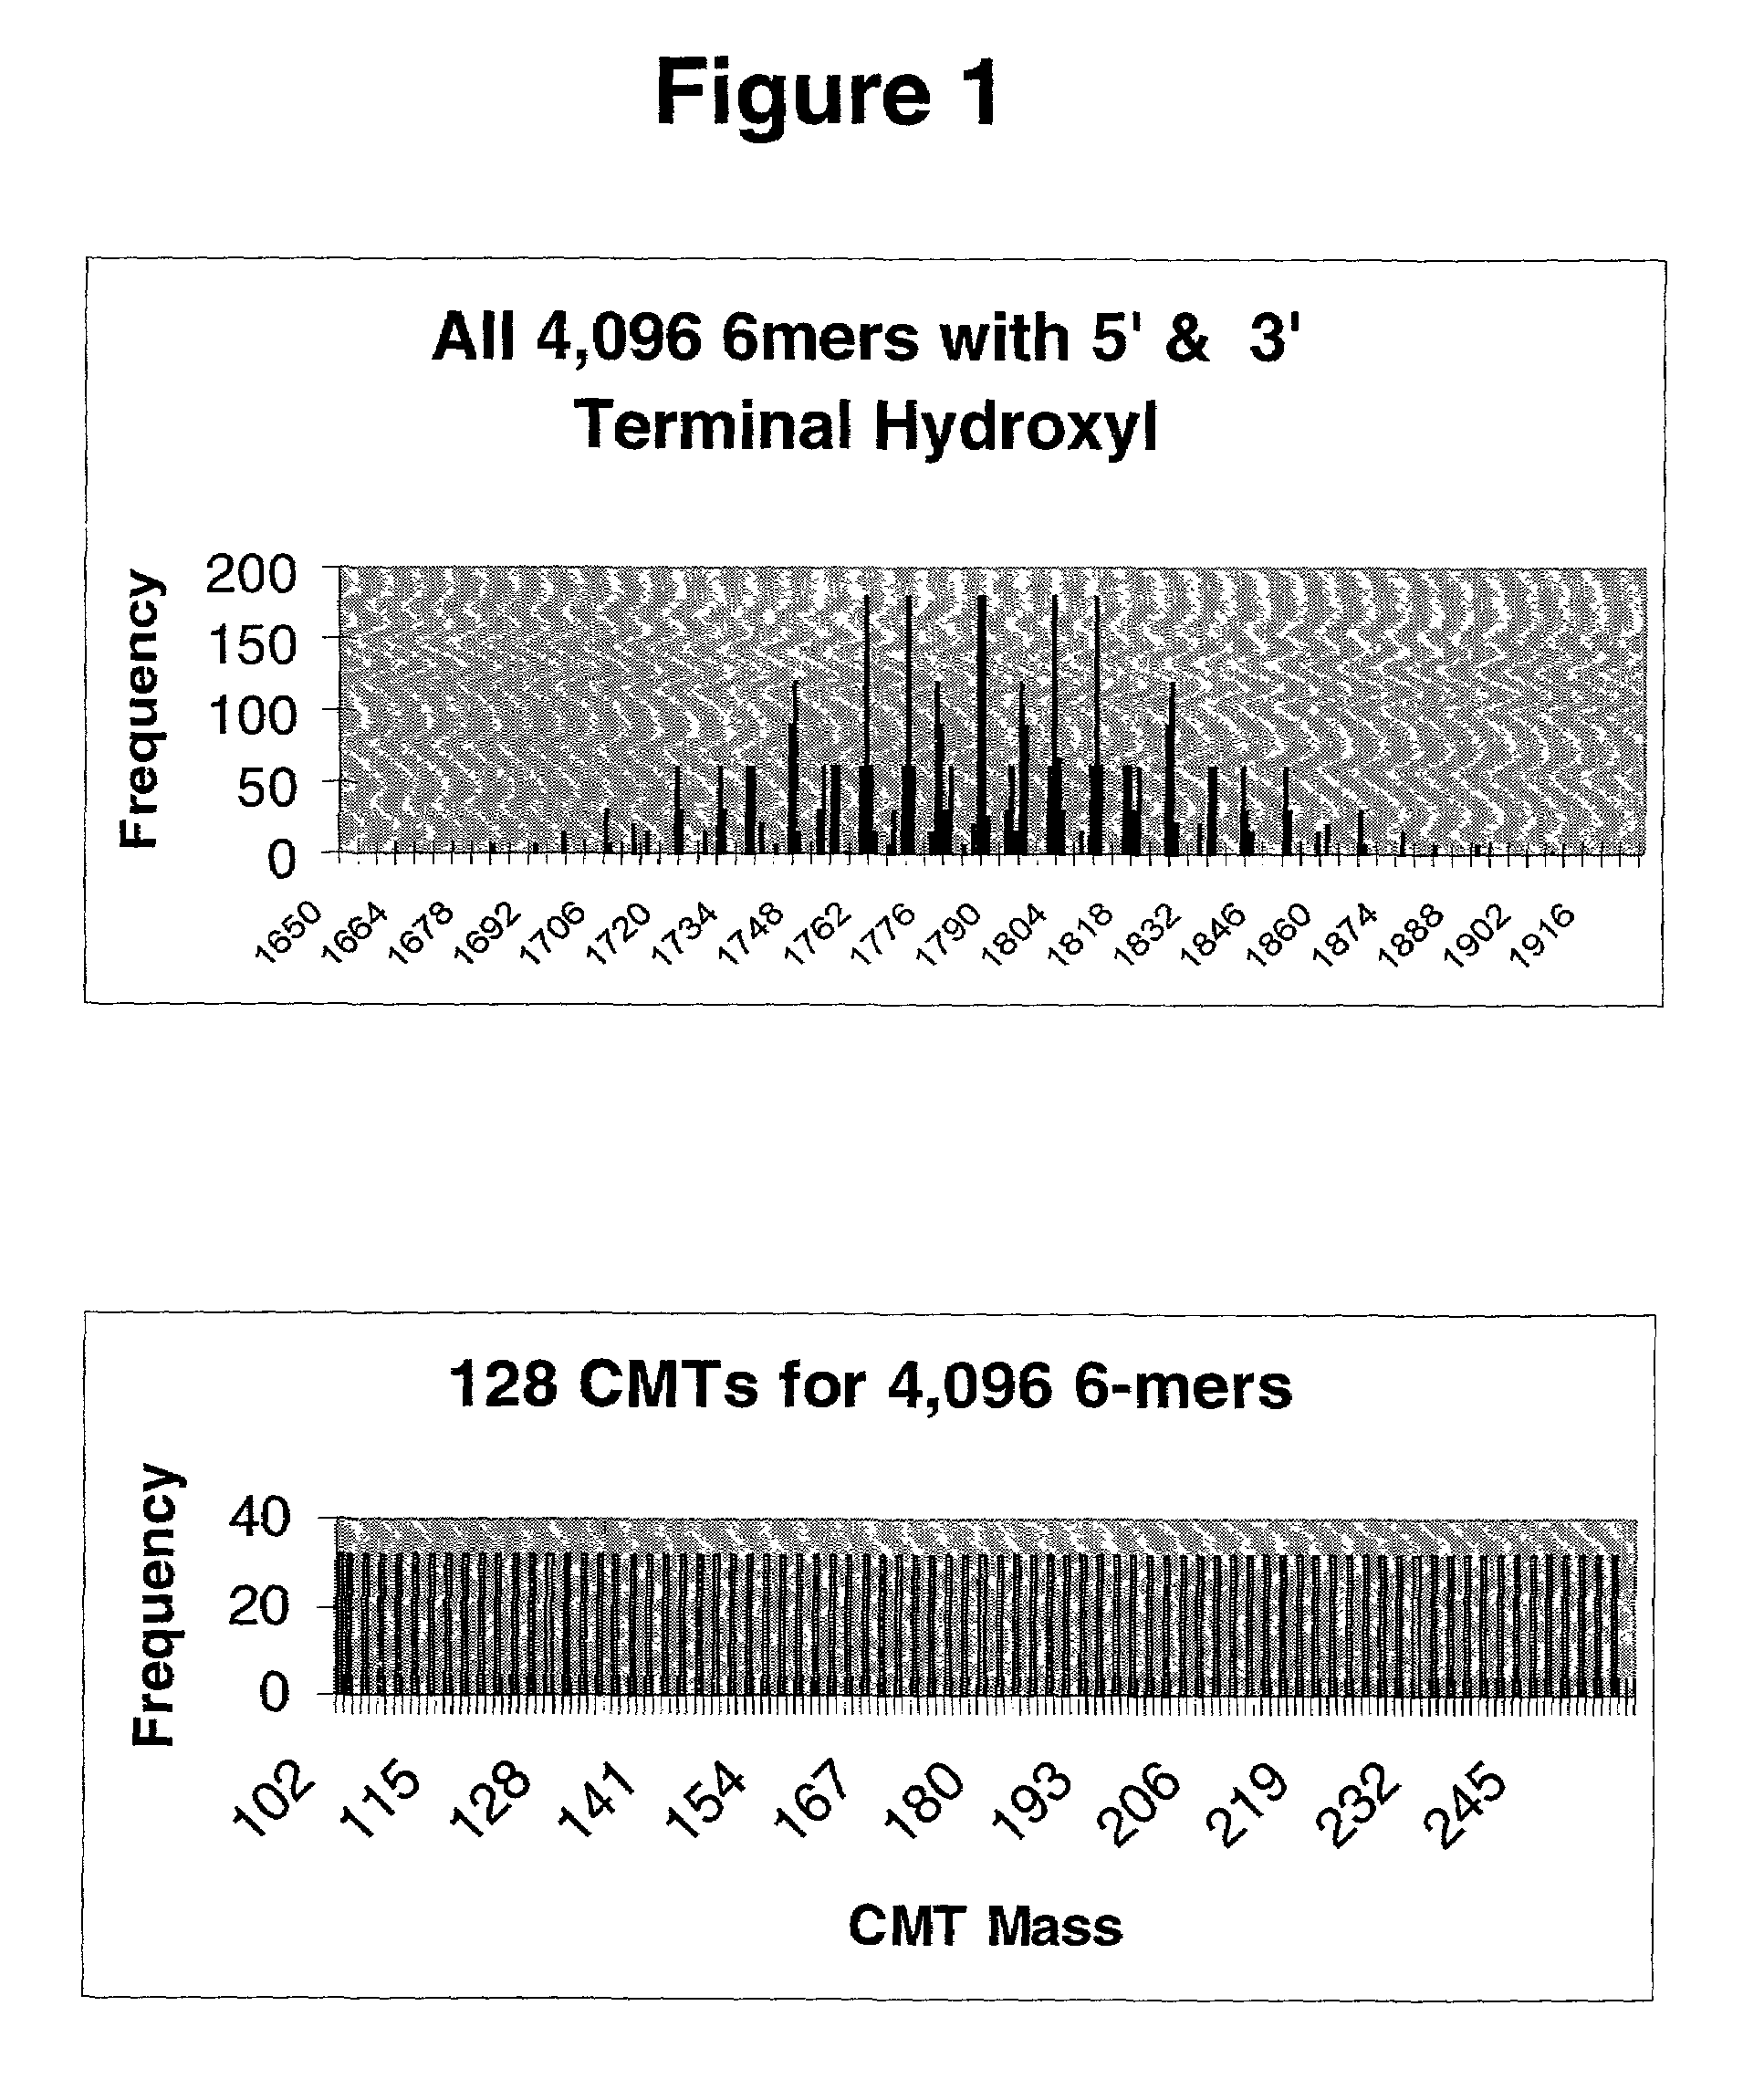 Method and reagents for analyzing the nucleotide sequence of nucleic acids